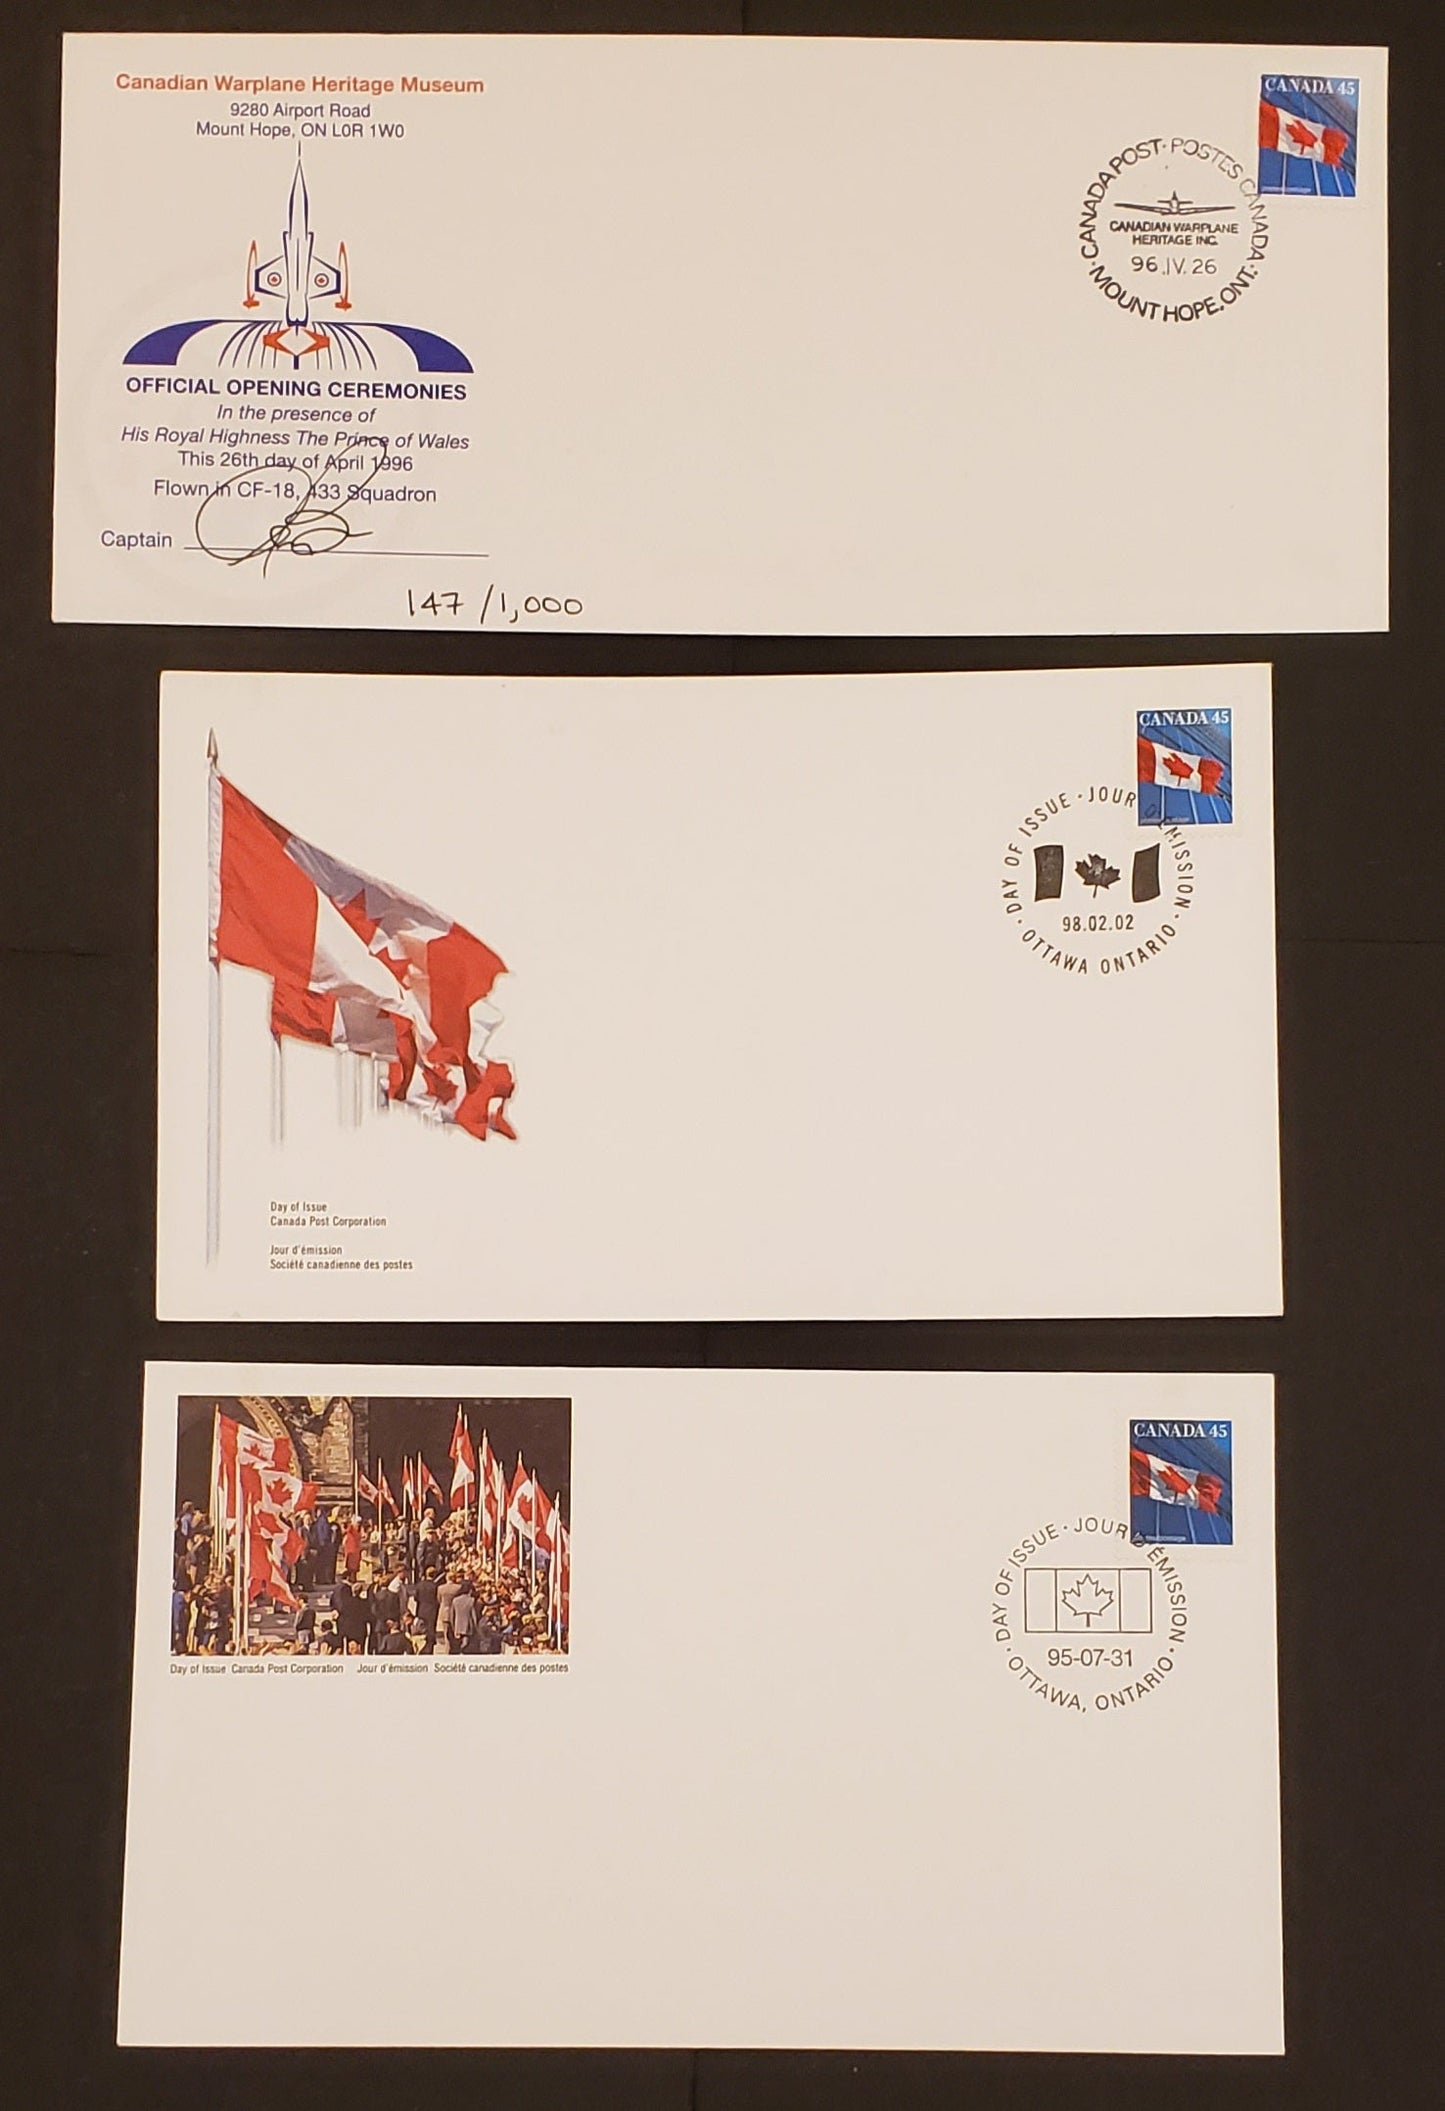 Lot 86 Canada #1361,c, 1362, S24a-c, S27 45c Multicoloured Flag 1995 Fruit/Flag, 7 Canada Post FDC's & Special Event Covers Franked With Singles, HB & DF Envelopes For Lester Pearson, Canadian Warplane Heritage Museum & Edmonton, Cat. Value $38